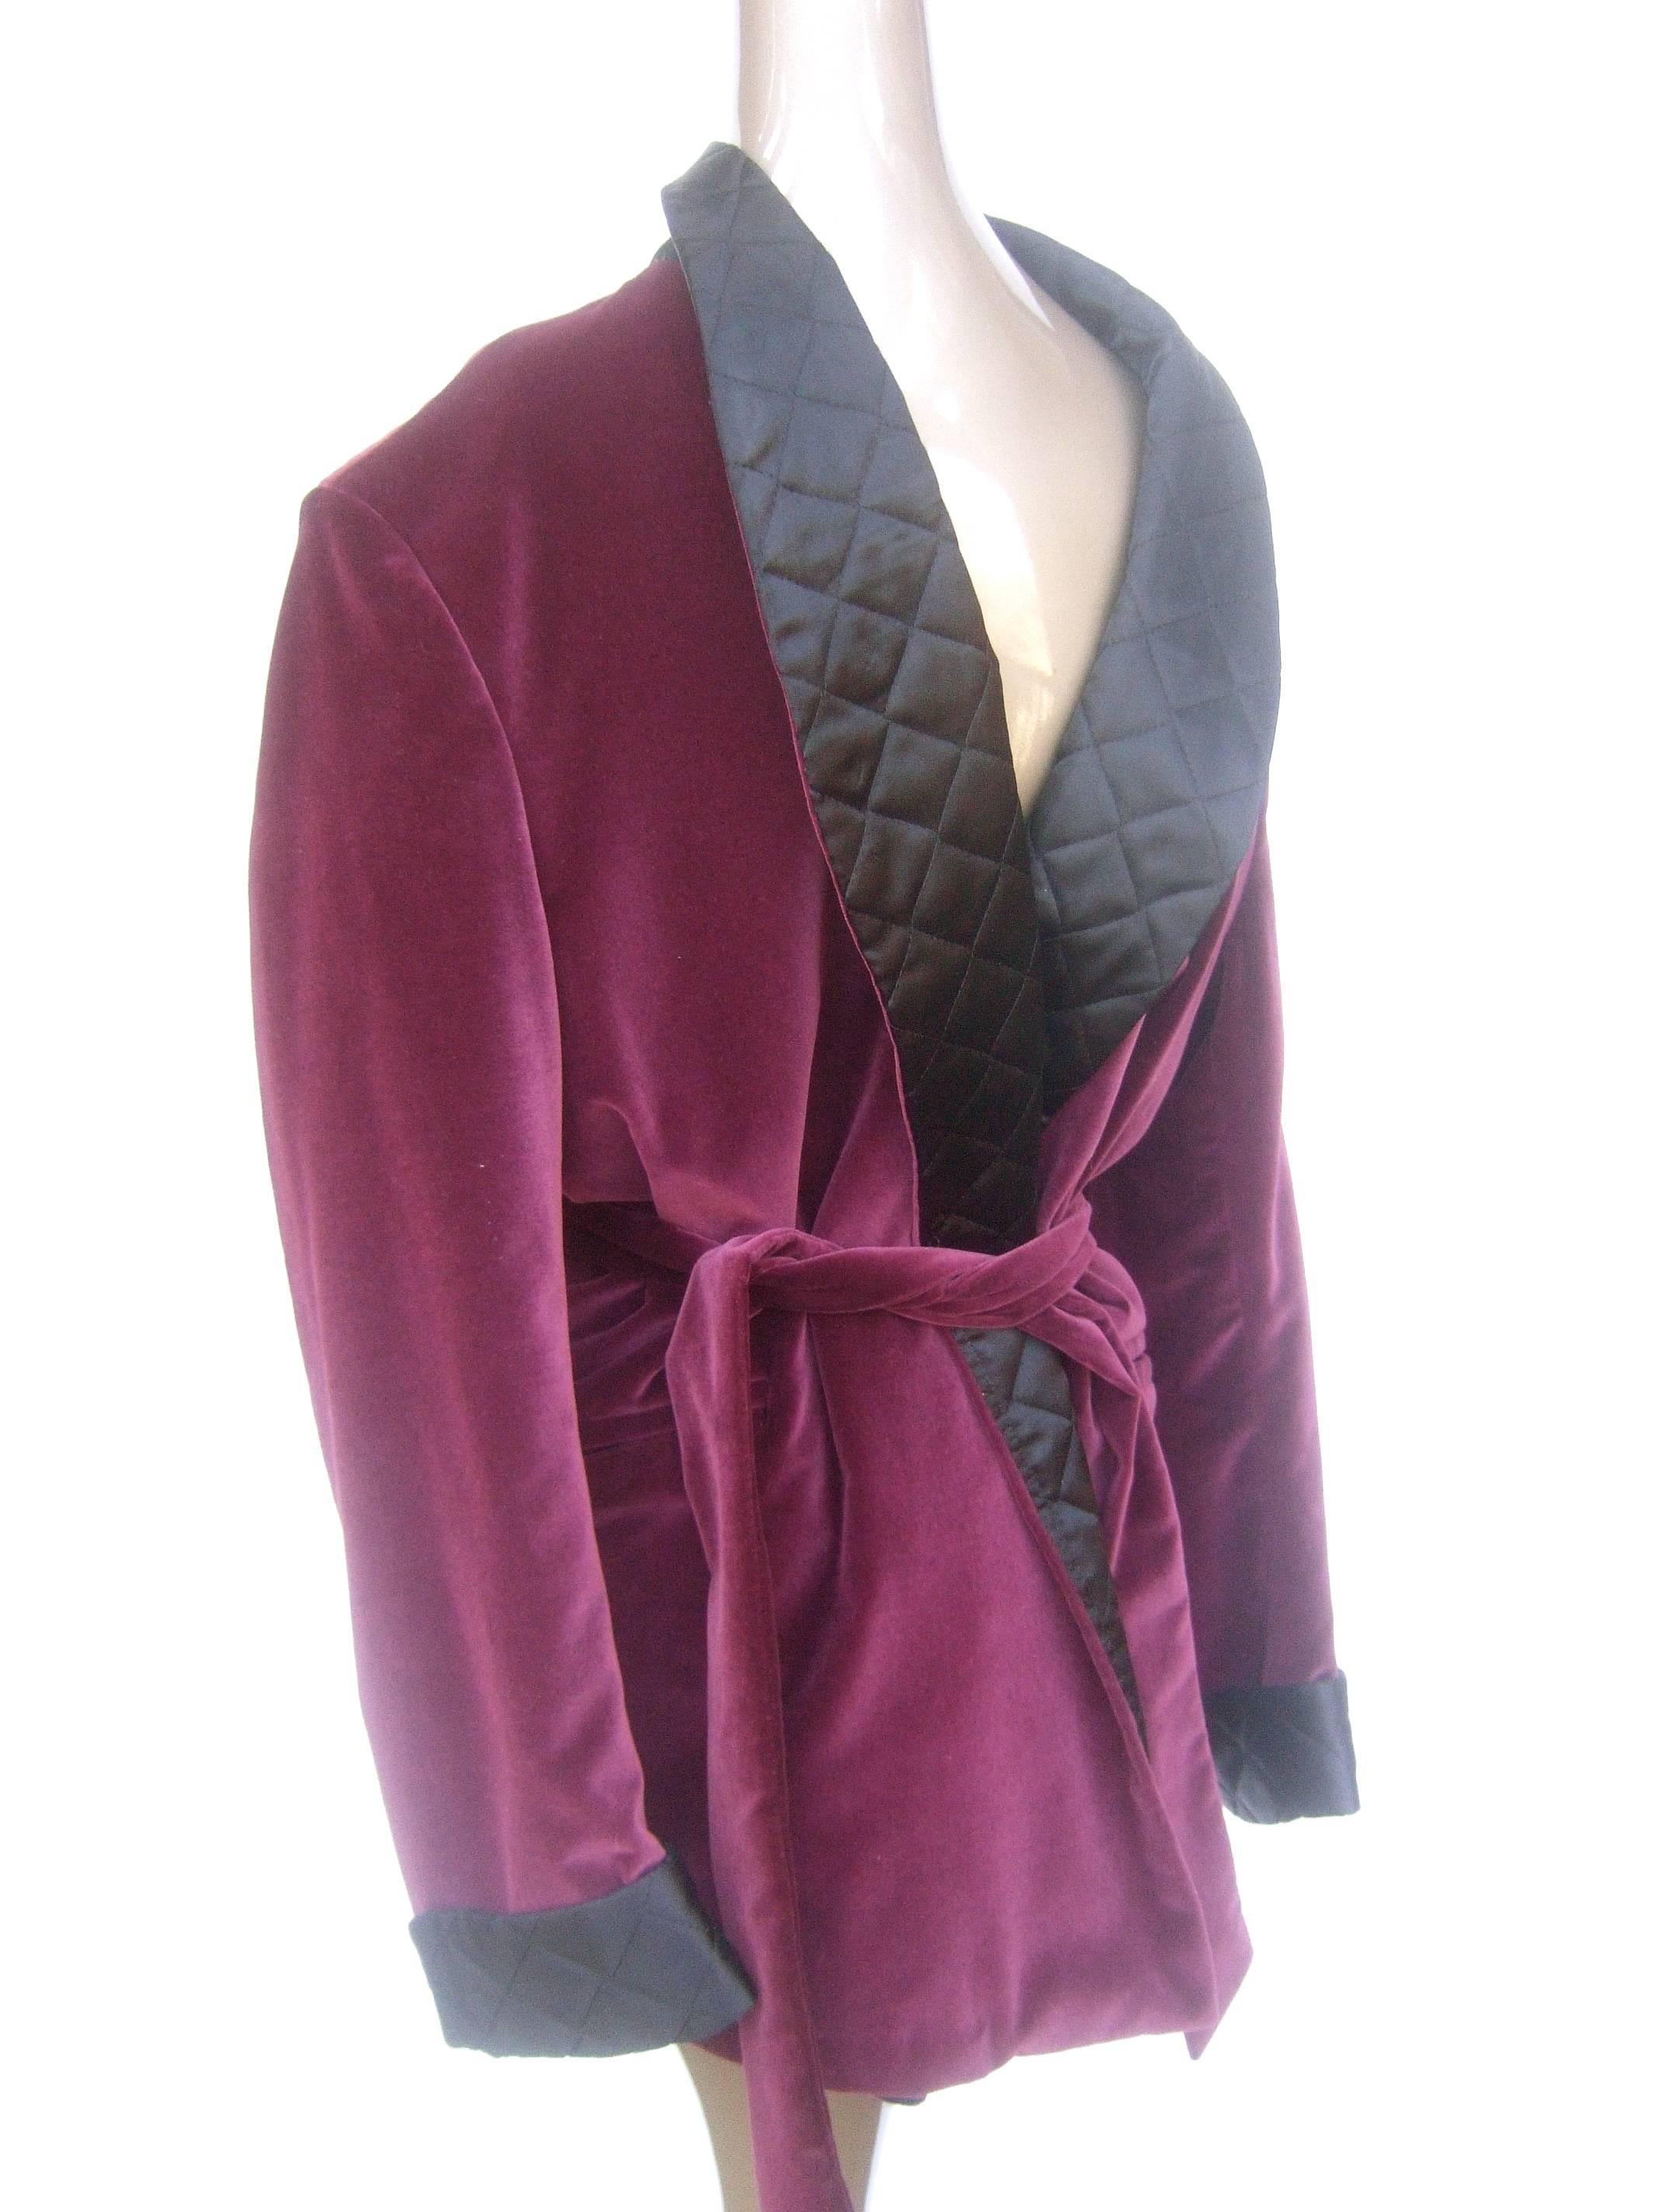 Neiman Marcus Men's burgundy velvet smoking jacket 
The luxurious lounge jacket is designed with plush
burgundy color cotton velvet 

The collar lapel & cuffs are contrasted with quilted
black satin acetate. The stylish smoking jacket 
cinches